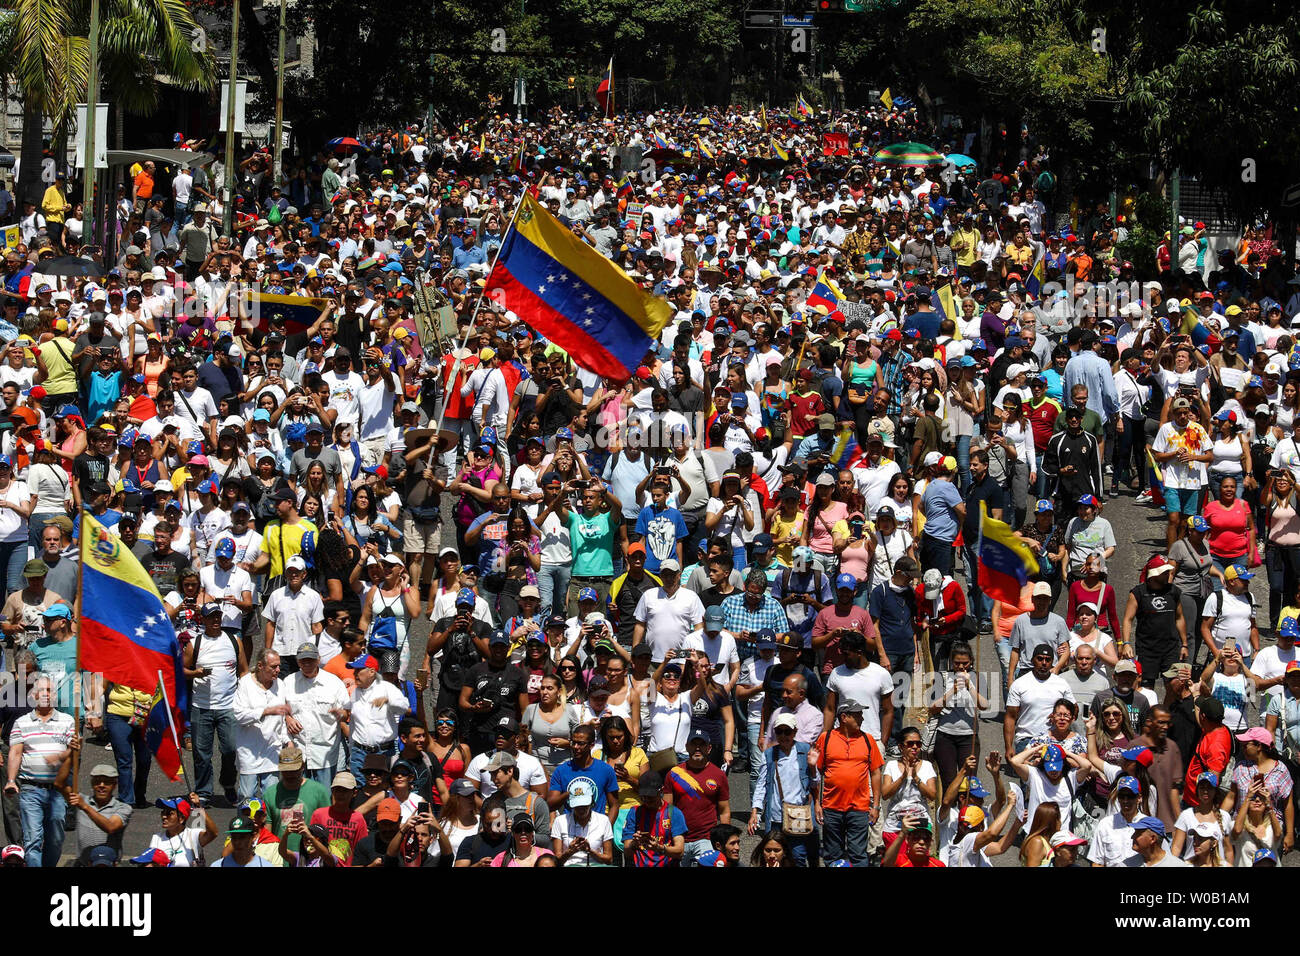 Supporters of Venezuelan opposition leader Juan Guaido gather in Caracas on February 2, 2019. Venezuelan protesters flowed into the streets of Caracas Saturday, with flags and placards, many to support opposition leader Juan Guaido's calls for democratic elections and others to back embattled President Nicolas Maduro.     Photo by Cristian Hernandez/UPI Stock Photo